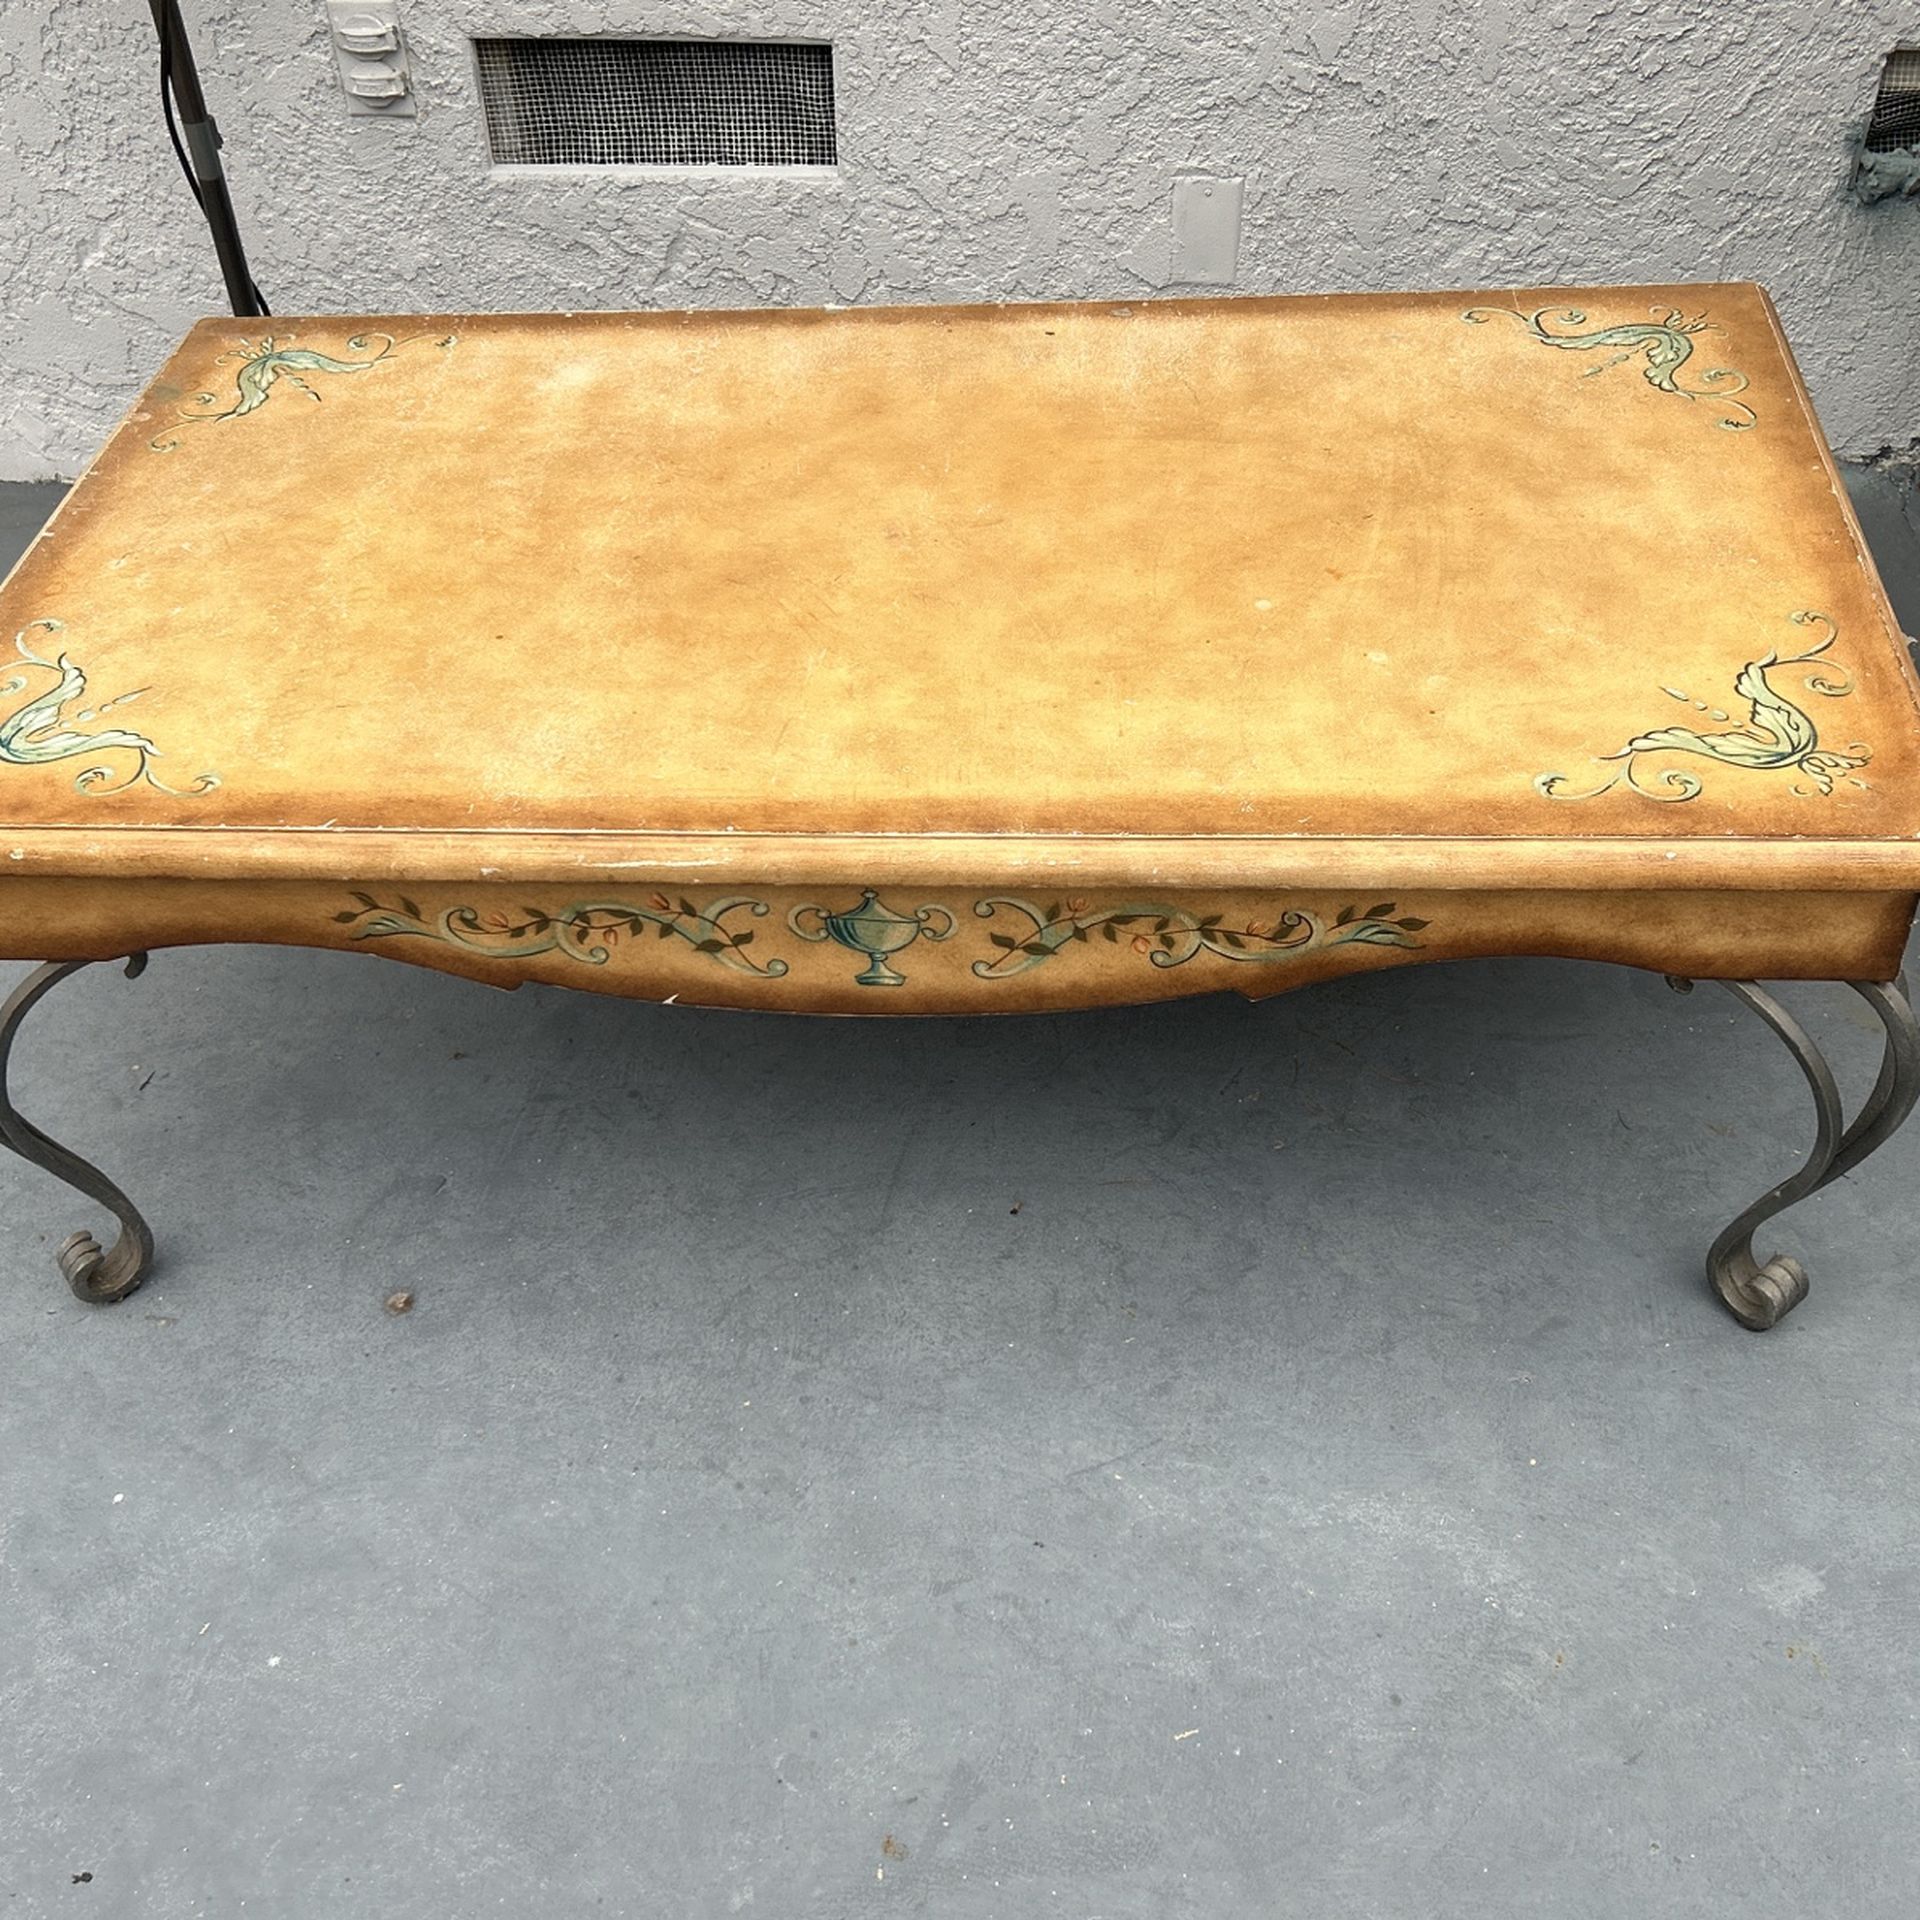 Vintage Coffee Table 50x28x18 Need Some Facelift, If Interested In RestoringMetal Kegs